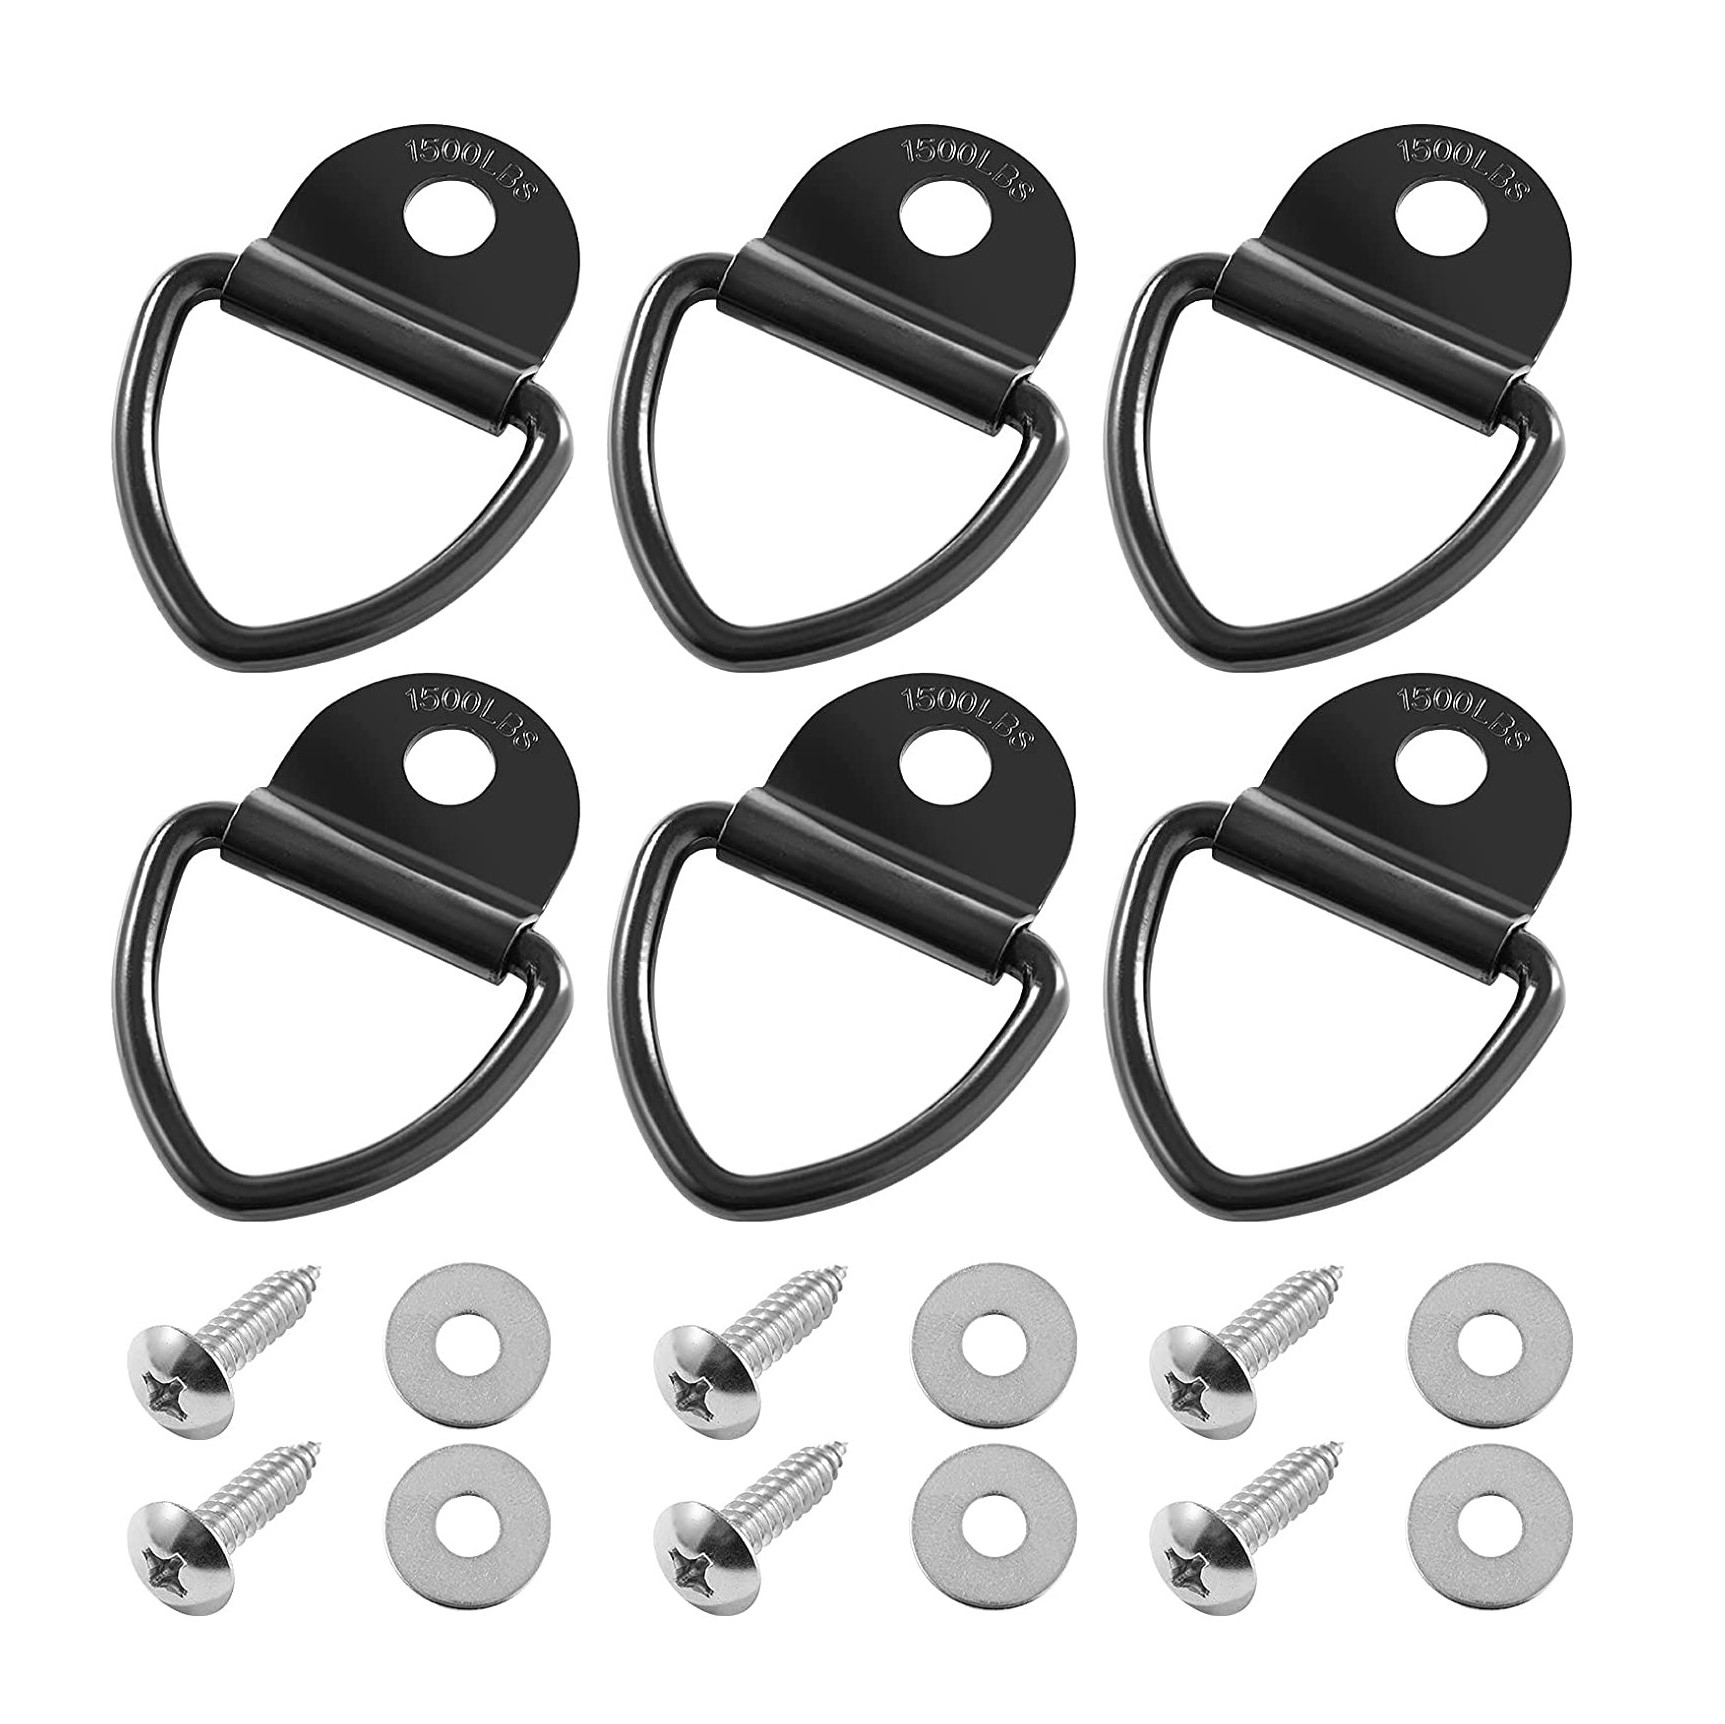 6 Pack D-Ring Tie-Down Anchors Hooks 1/4 Heavy Duty D Rings TieDowns for  Loads on Trailers Trucks RV Campers Boats Pickup Kayaks Motorcycles